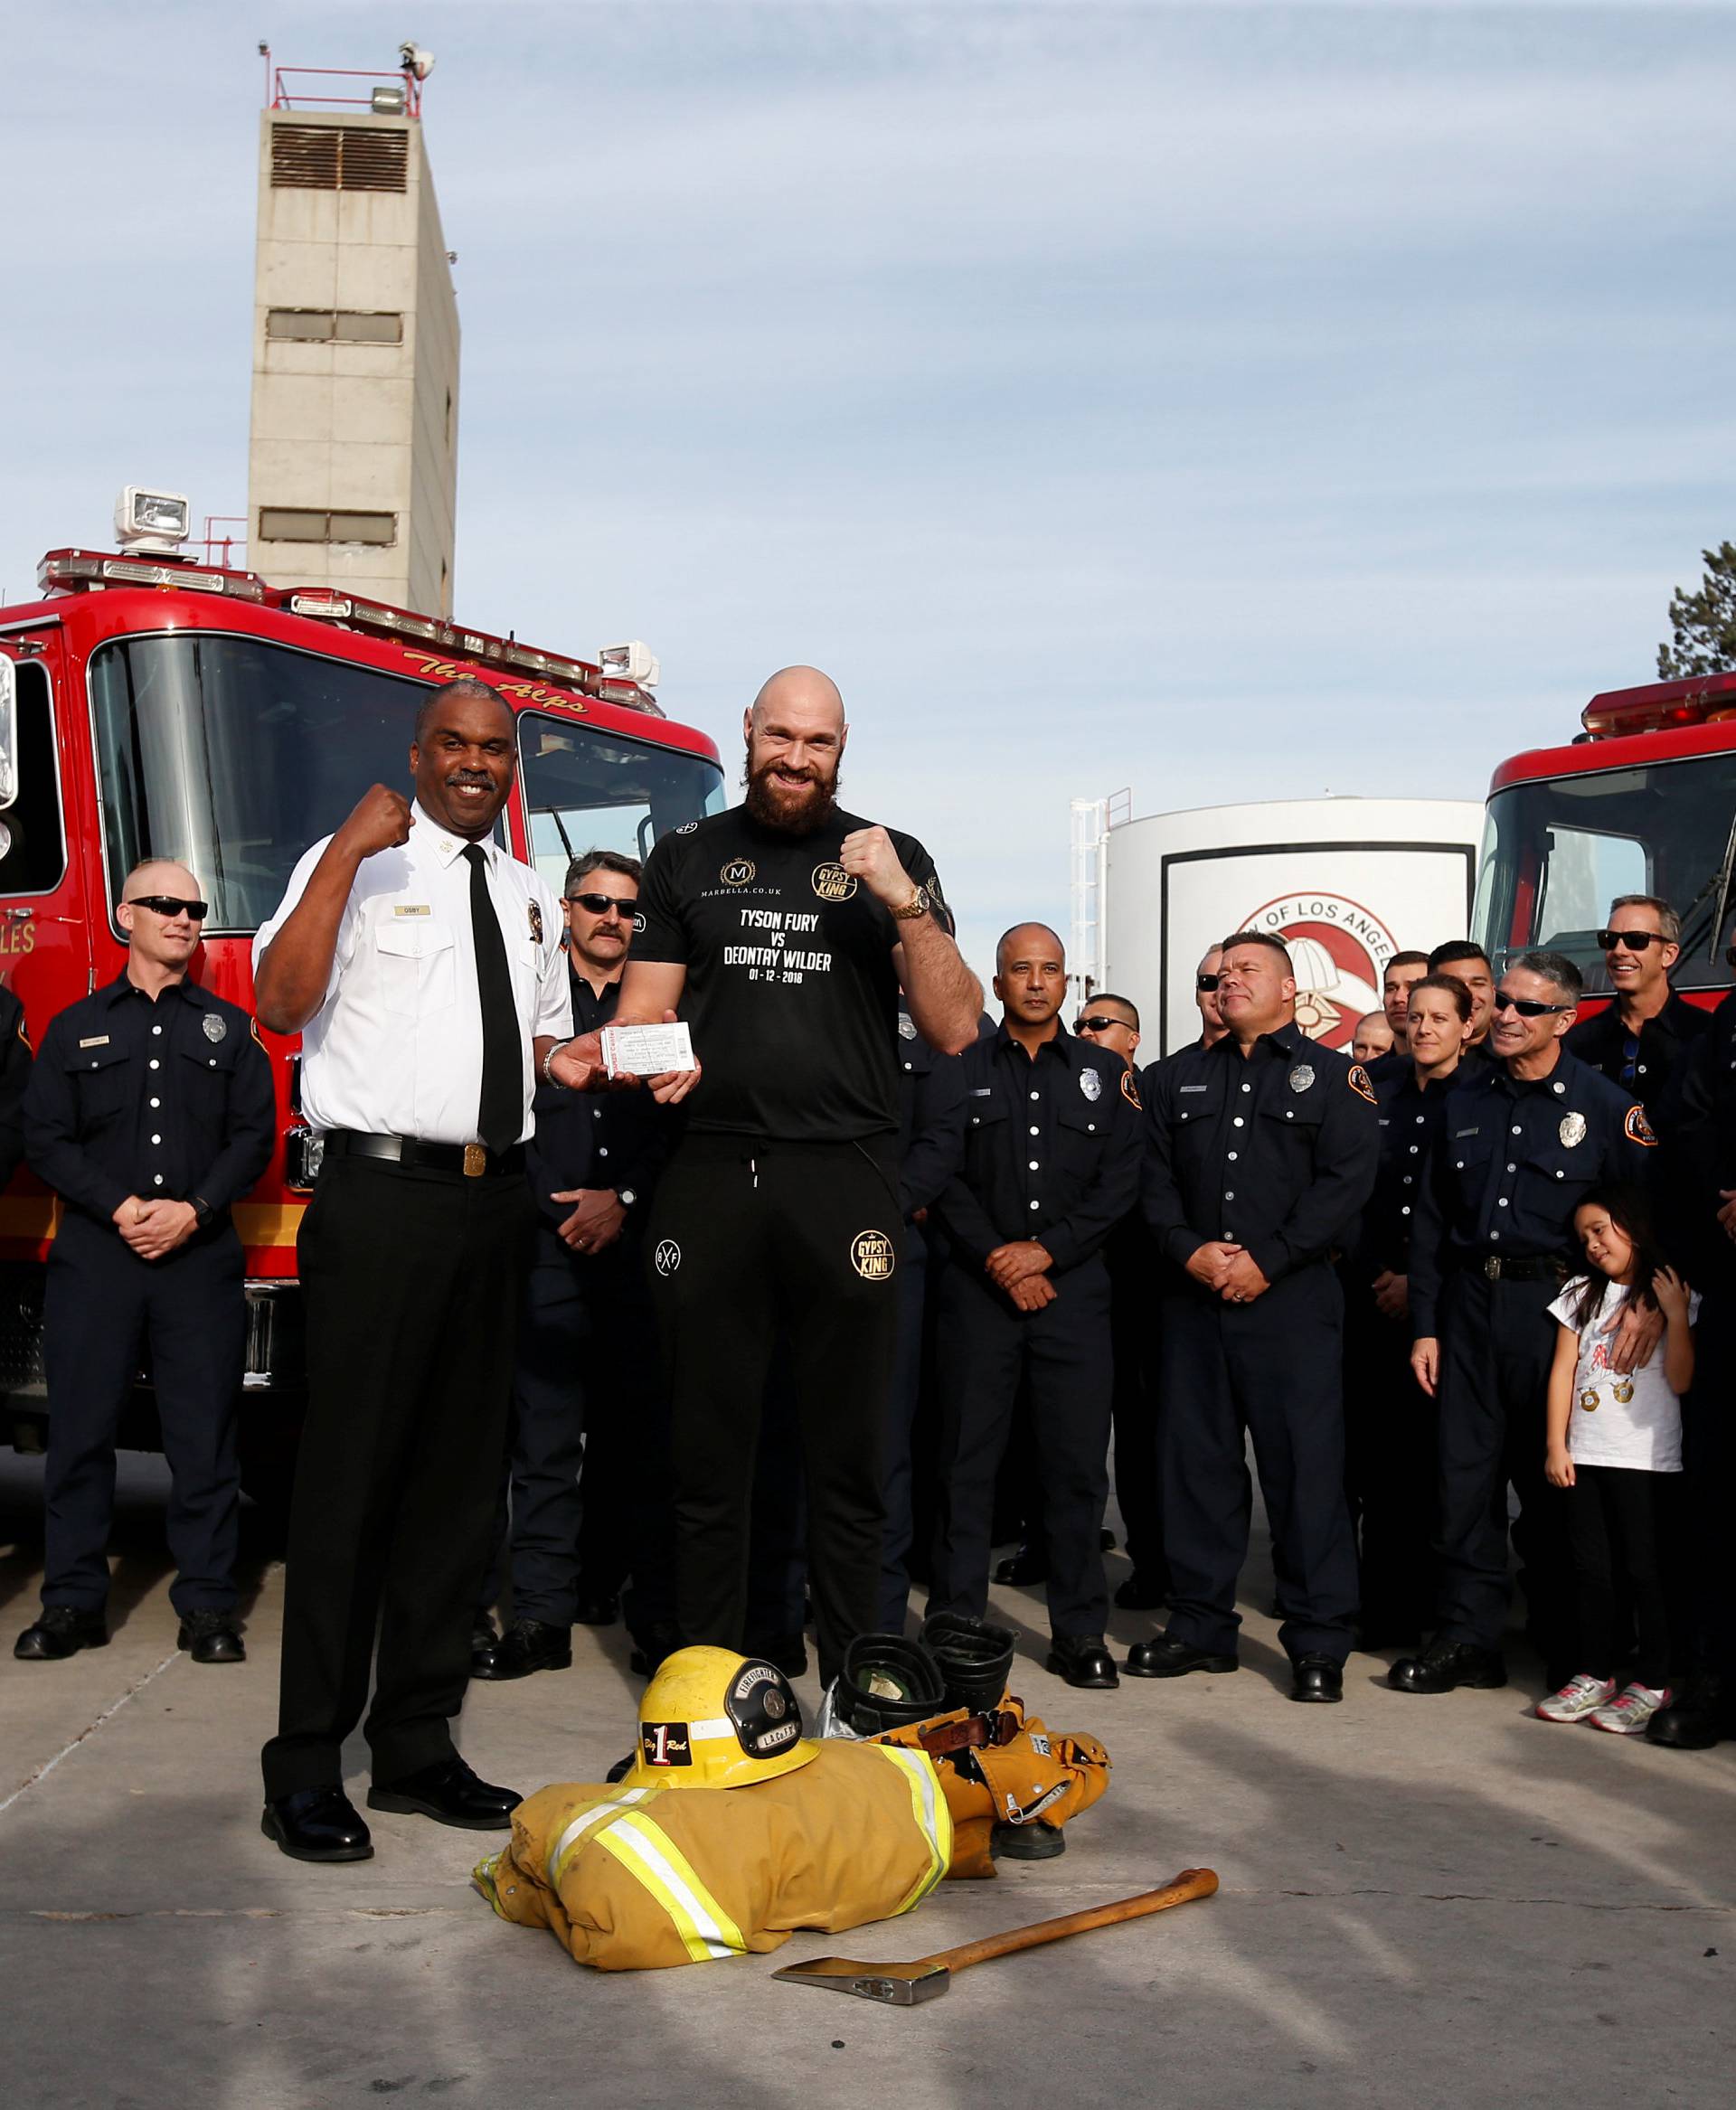 Tyson Fury presents tickets to LA firefighters ahead of his WBC heavyweight title fight with Deontay Wilder